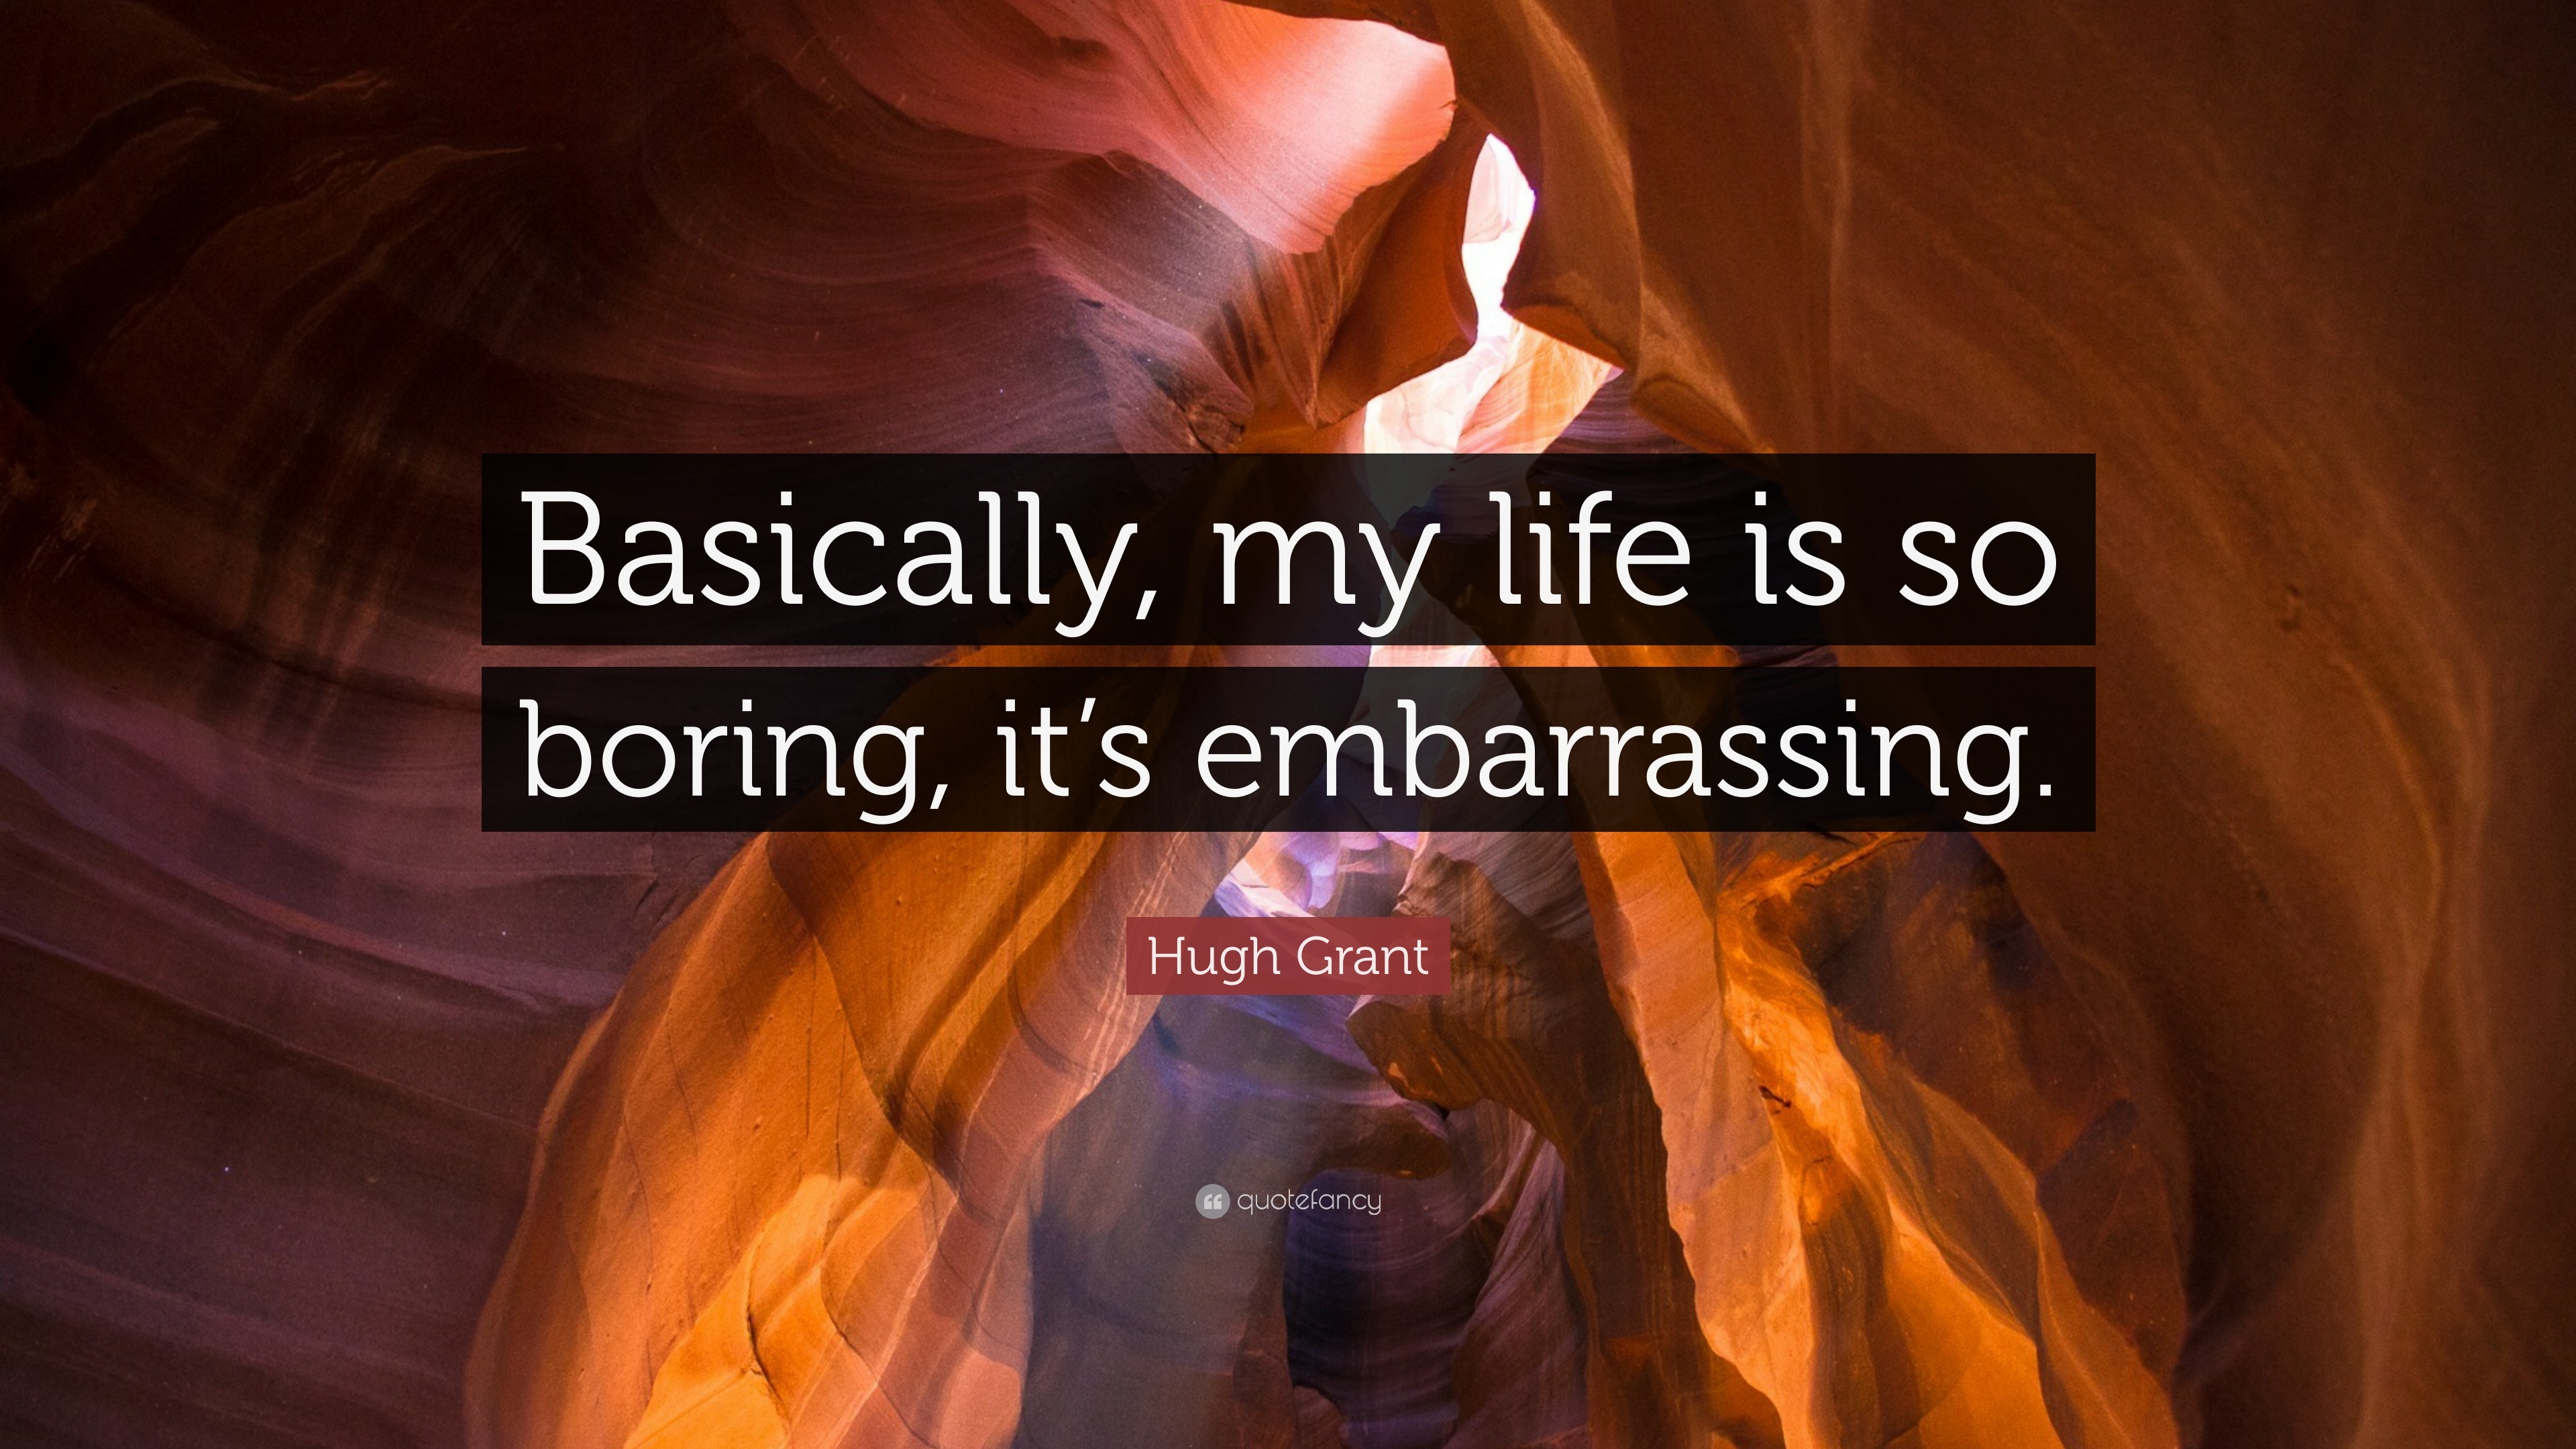 3840x2160 Hugh Grant Quote: “Basically, my life is so boring, it's embarrassing.